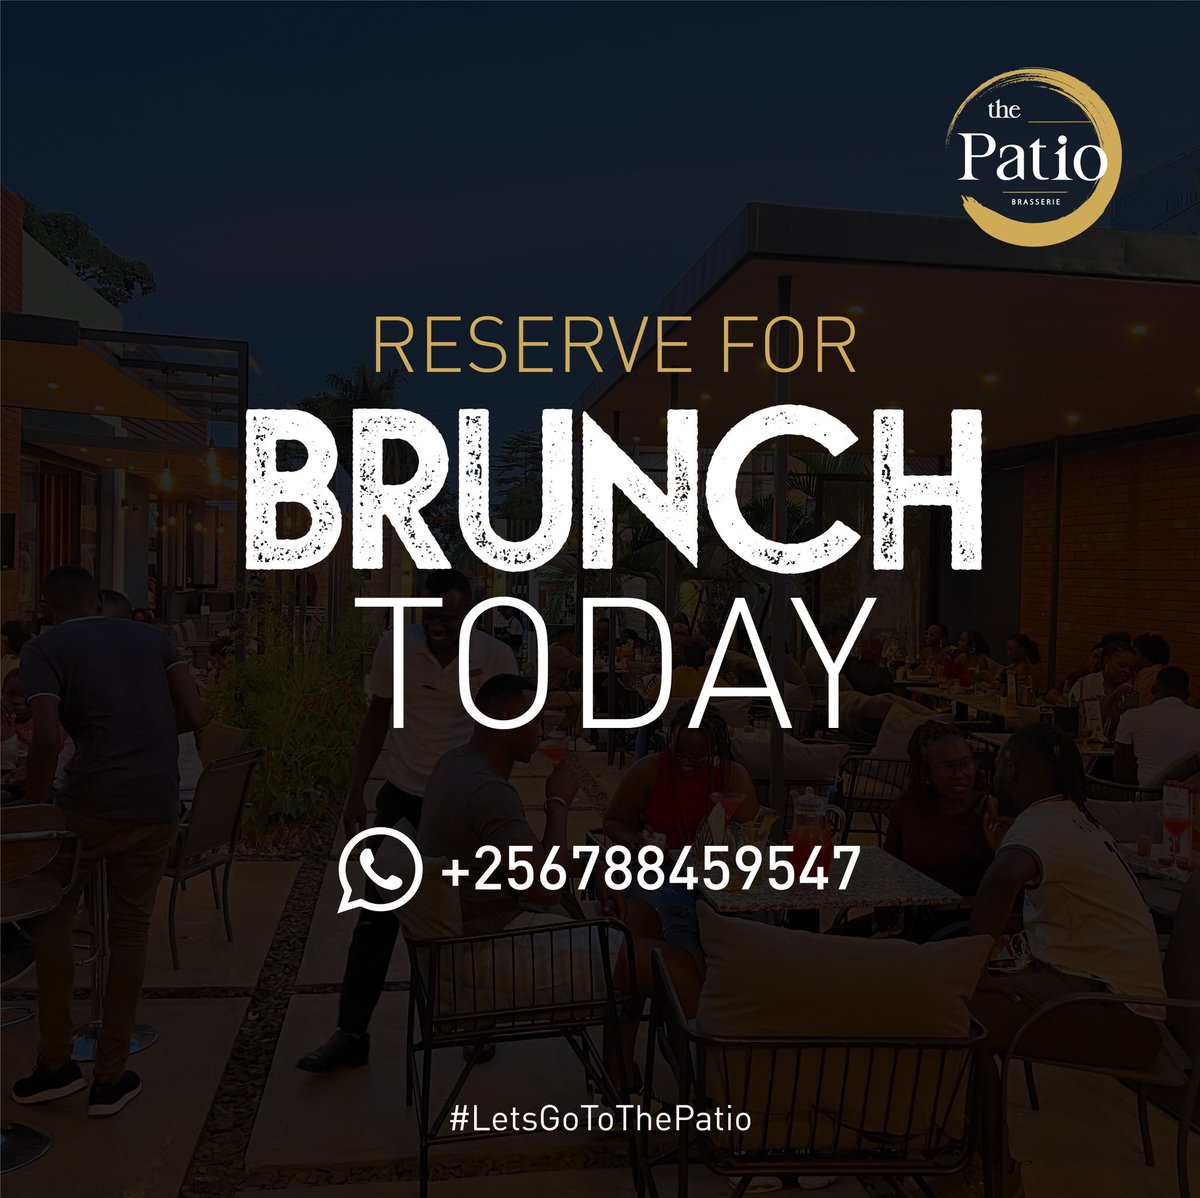 Reserve a table for brunch this weekend! Our menu has delicious options for you to try out. #ThePatioBrunch #LetsGoToThePatio